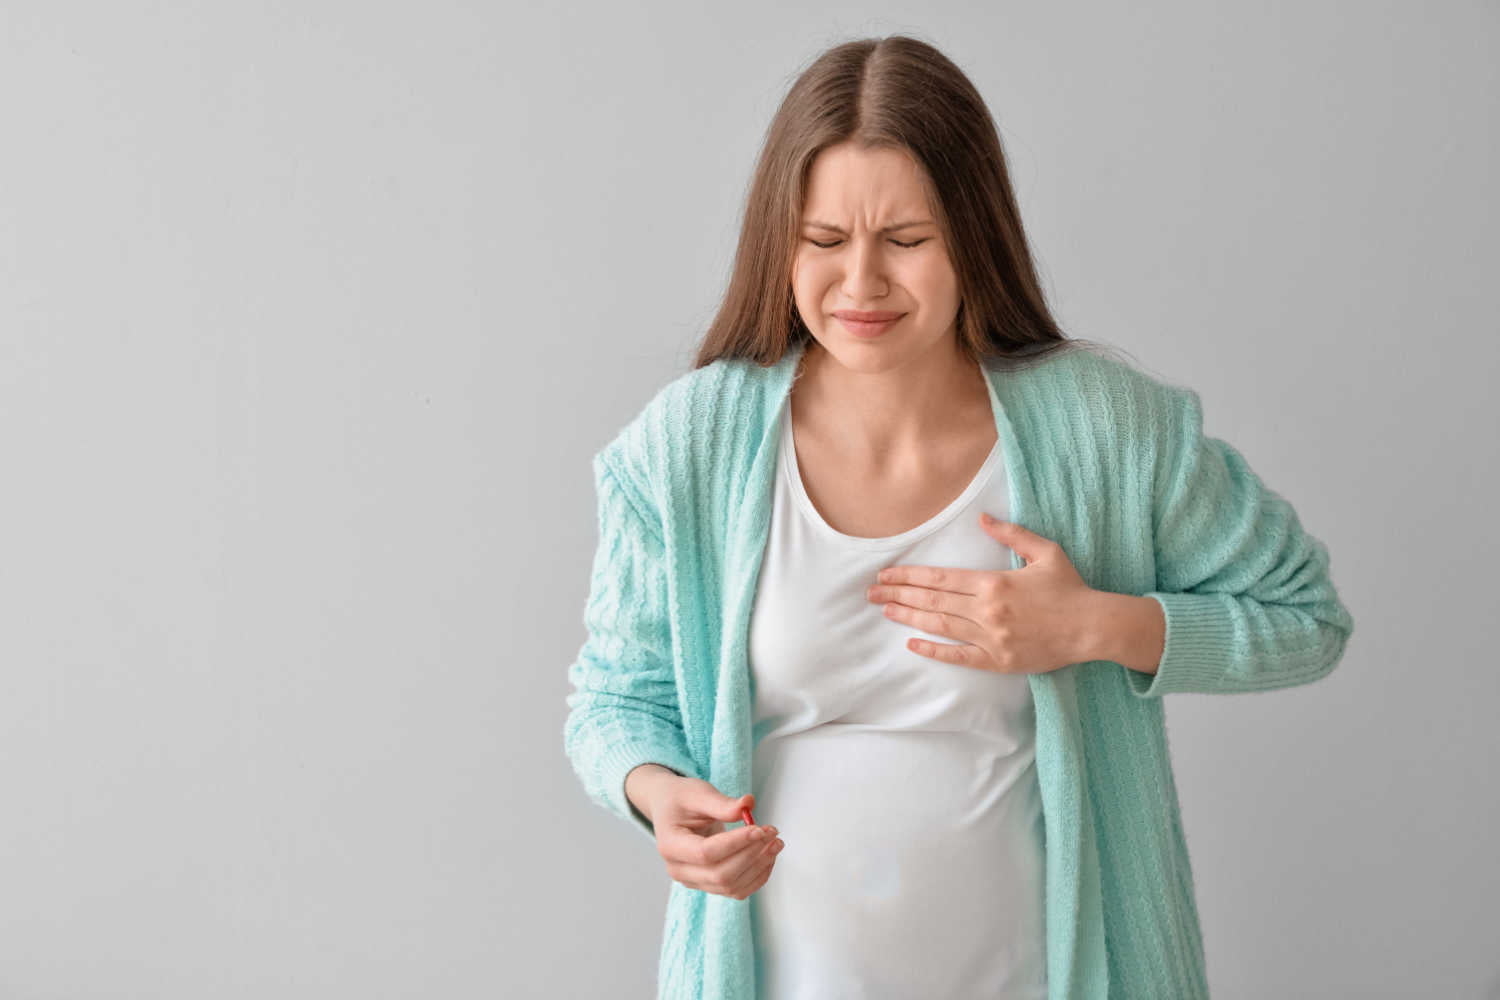 at what stage of pregnancy do breasts get sore?